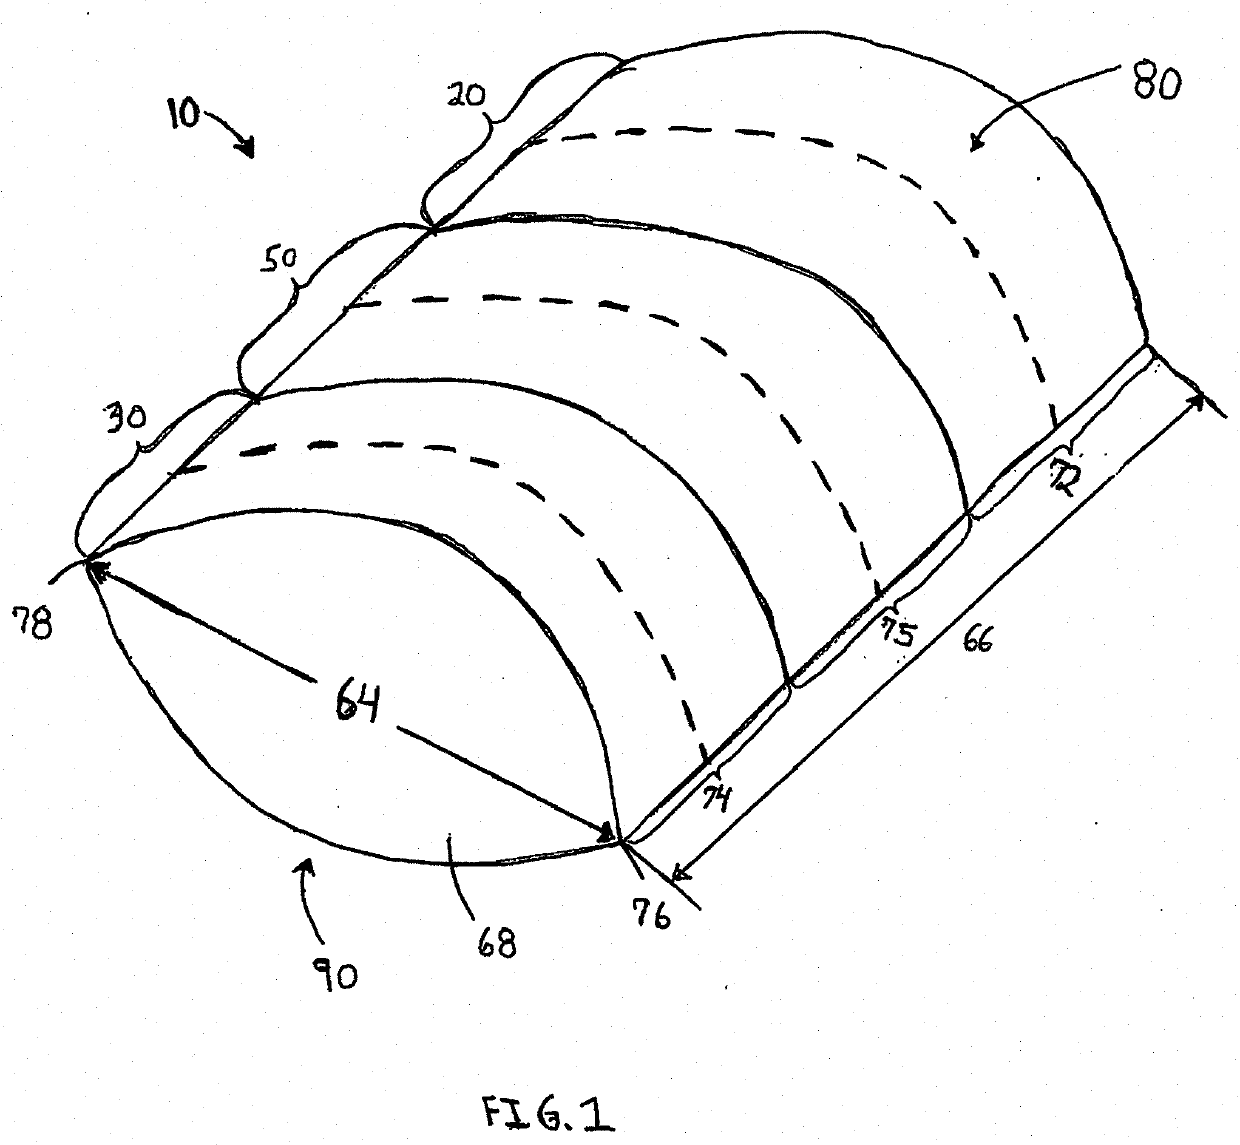 Pillow structure and method of use